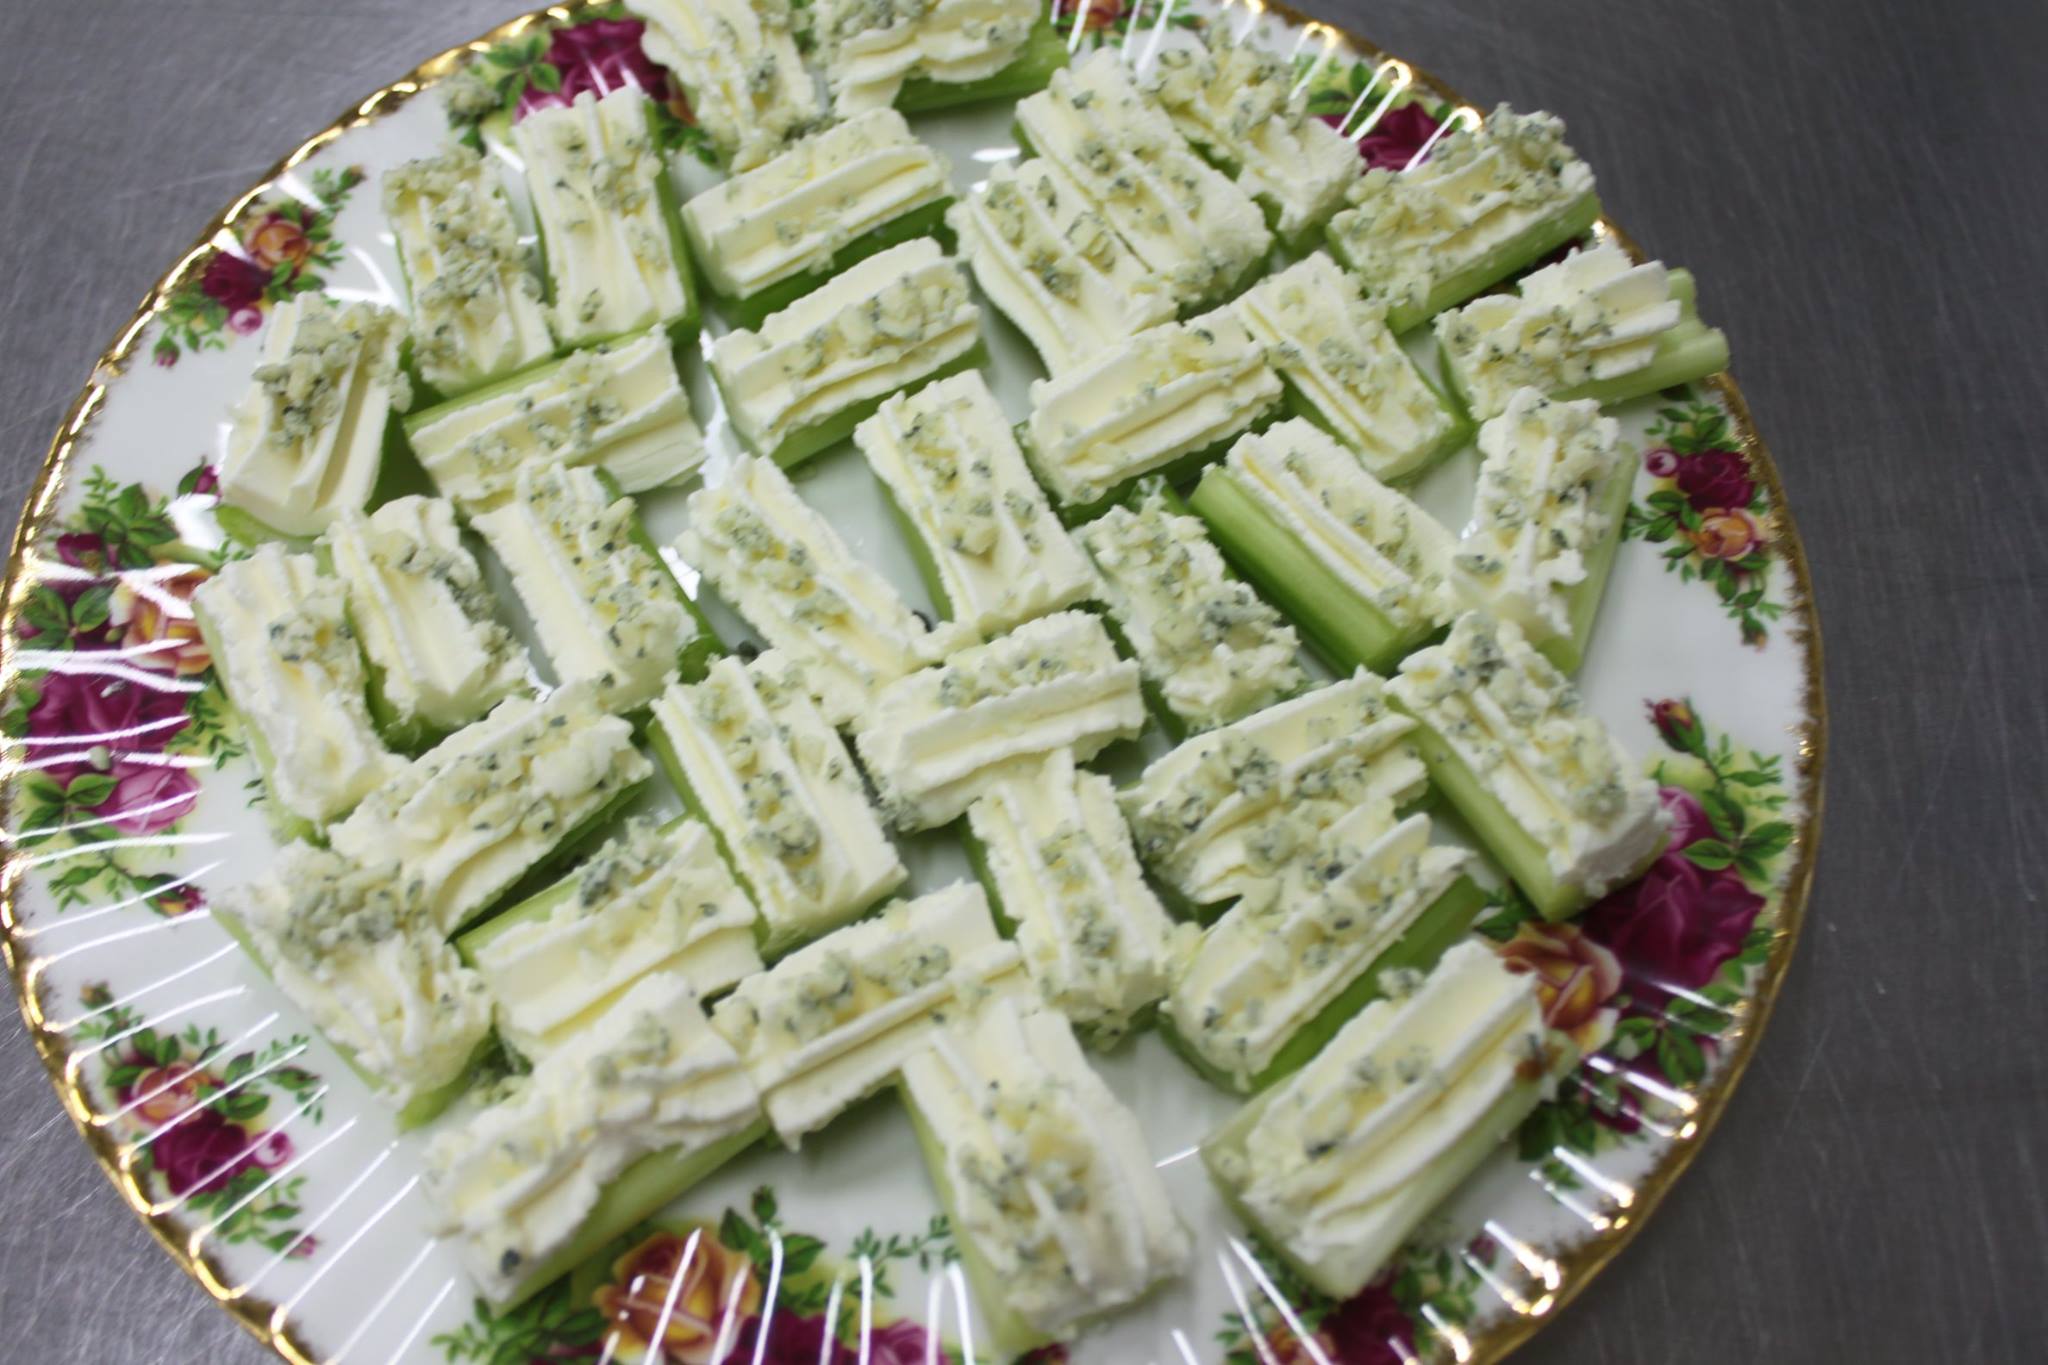 Celery sticks filled with cream cheese topped with Harrogate blue cheese canapes.